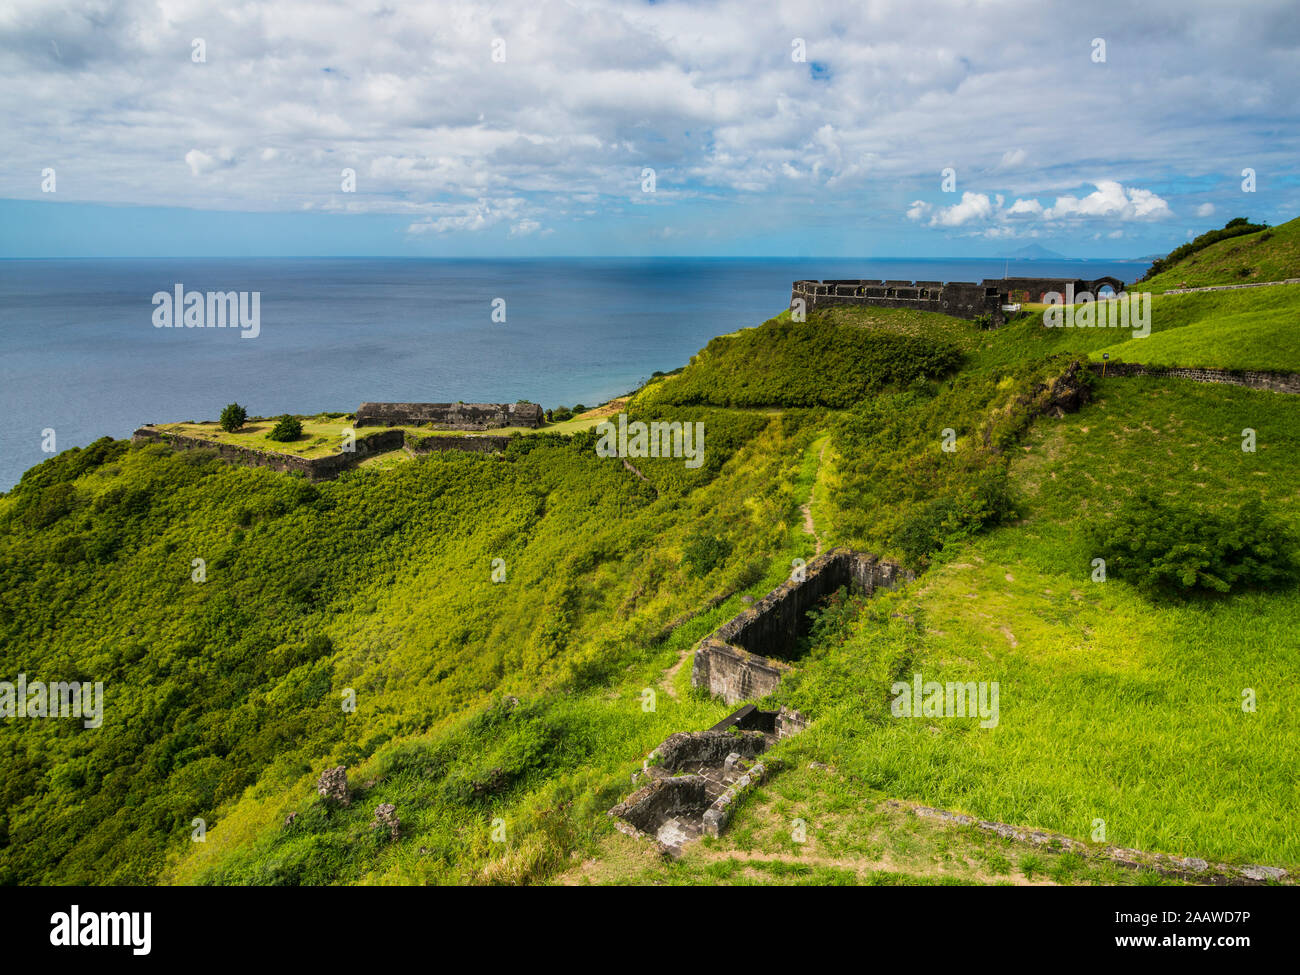 Scenic view of Brimstone hill fortress by sea against sky, St. Kitts and Nevis, Caribbean Stock Photo